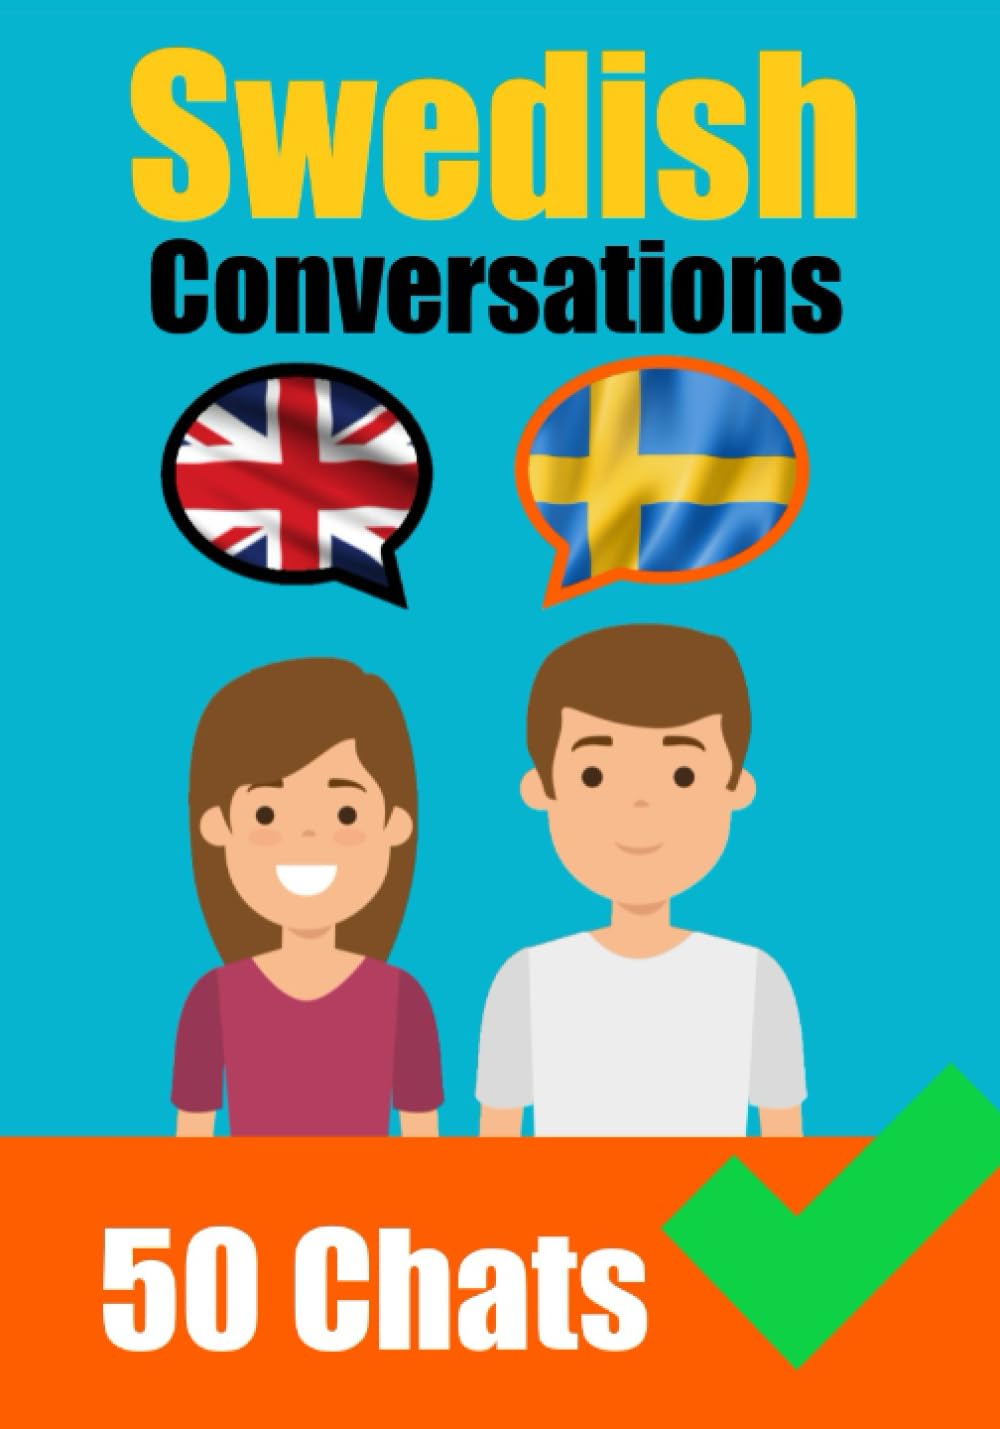 Conversations in Swedish | English and Swedish Conversations Side by Side - Skriuwer.com